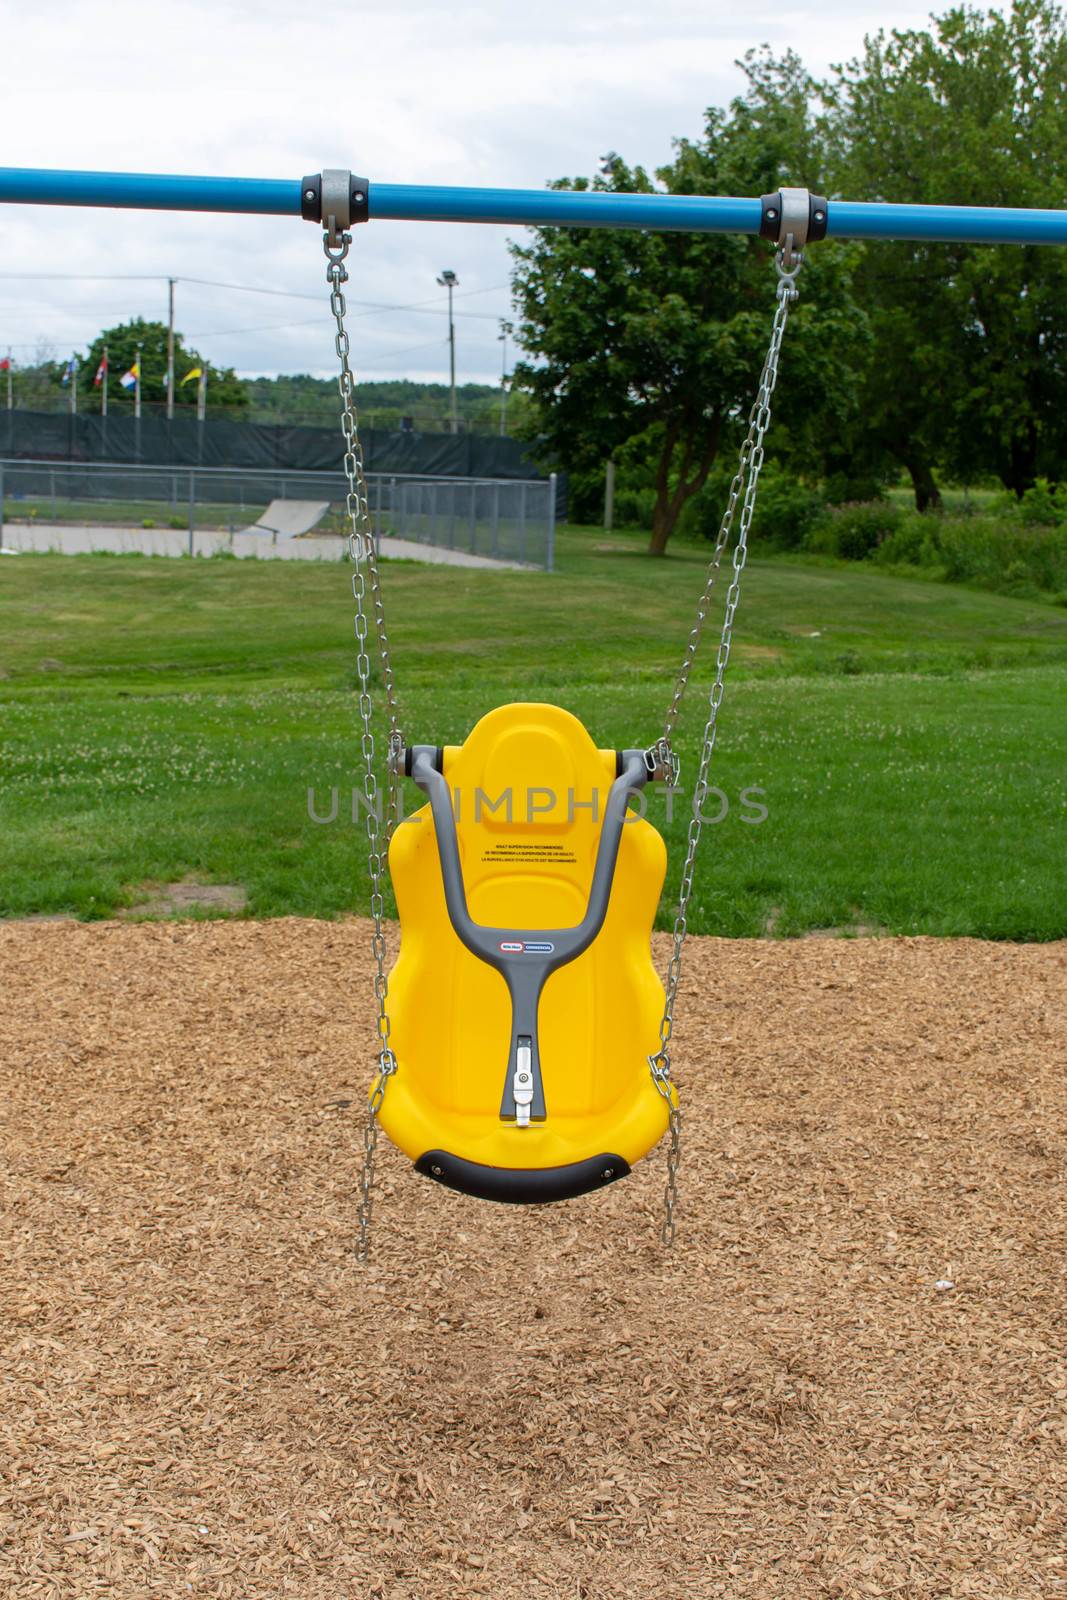 "Brighton, Ontario/Canada - 07/22/2019: Little tikes yellow disability swing for handicapped or special needs children at a park."